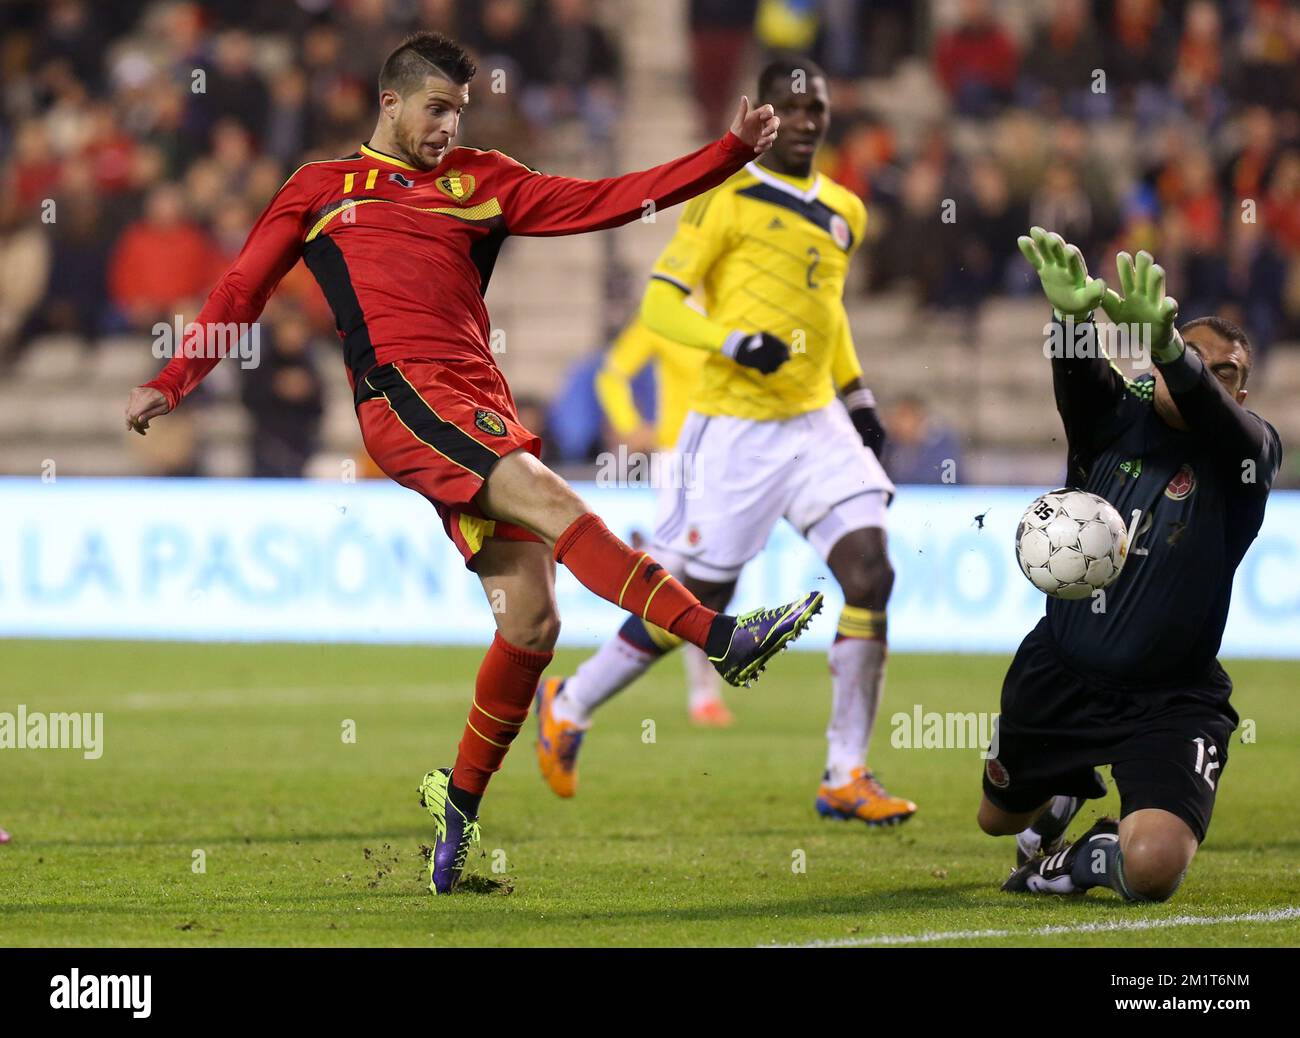 Colombia's goalkeeper Faryd Mondragon and Belgium's Kevin Mirallas fight for the ball during a friendly soccer game between the Belgian national soccer team Red Devils and Colombia, at the Koning Boudewijn Stadion - Stade Roi Baudouin in Brussels, on Thursday 14 November 2013. BELGA PHOTO VIRGINIE LEFOUR Stock Photo